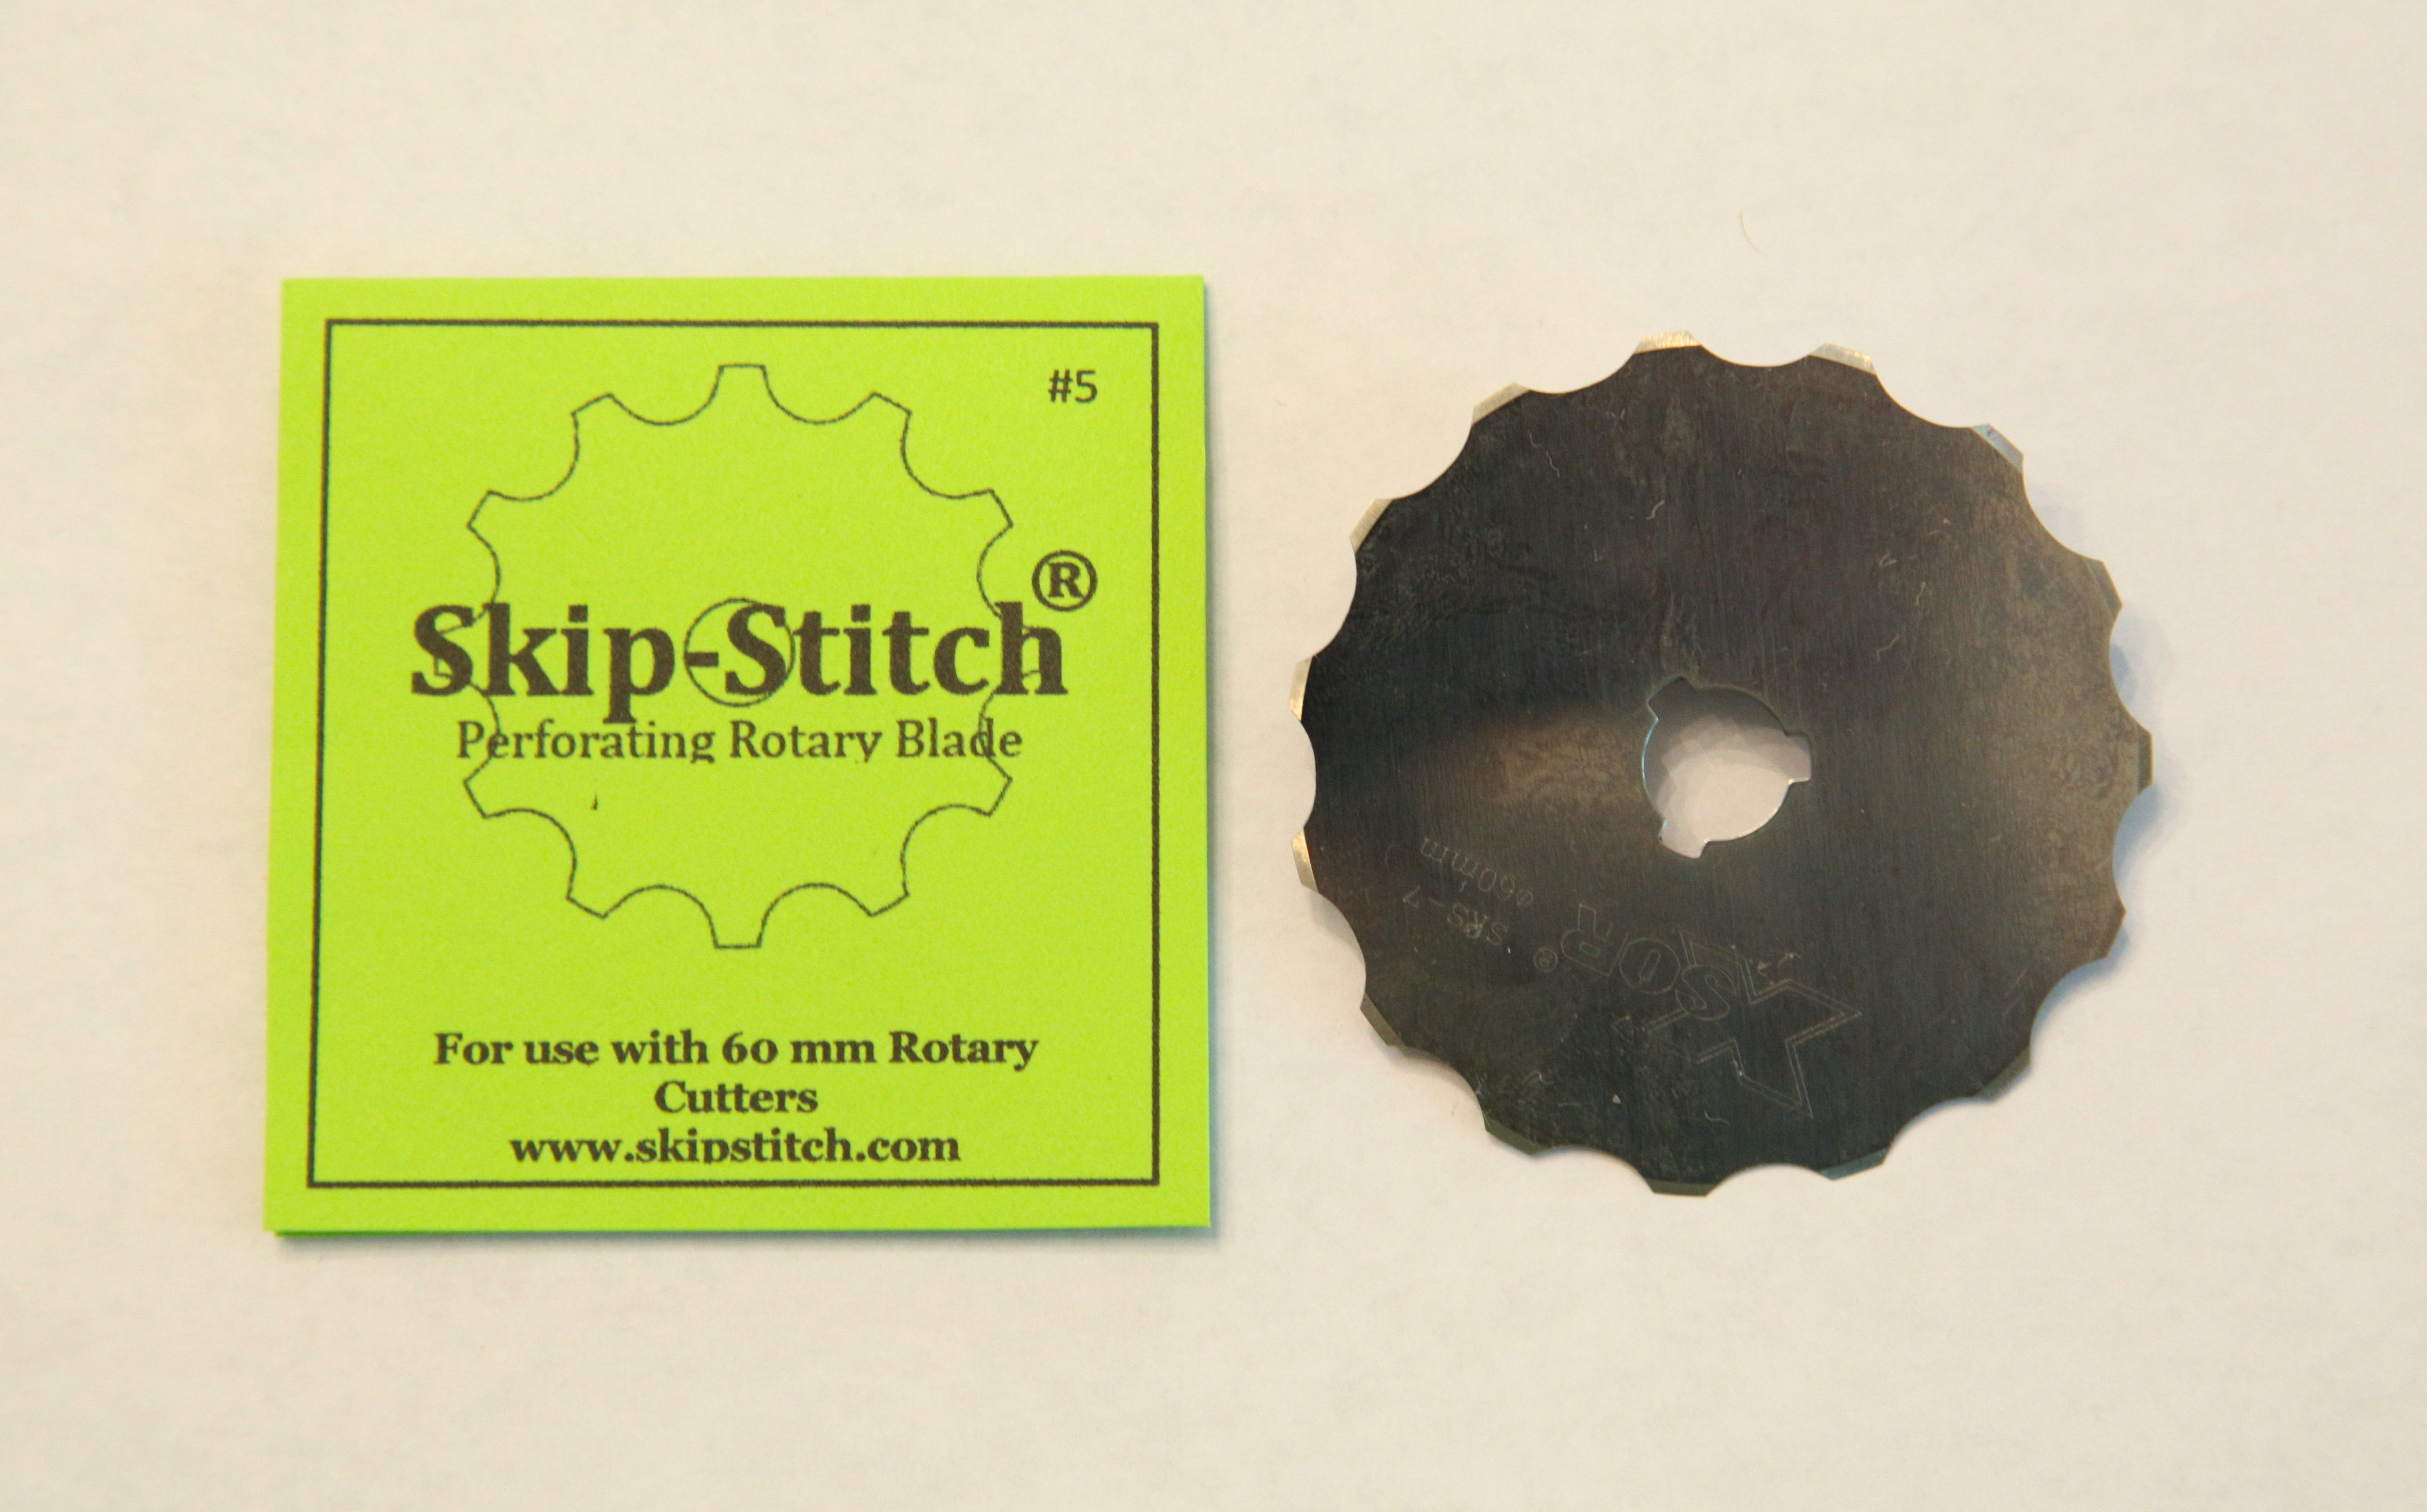 Olfa 60 mm Rotary Cutter Blades, 5 Pack - The Confident Stitch